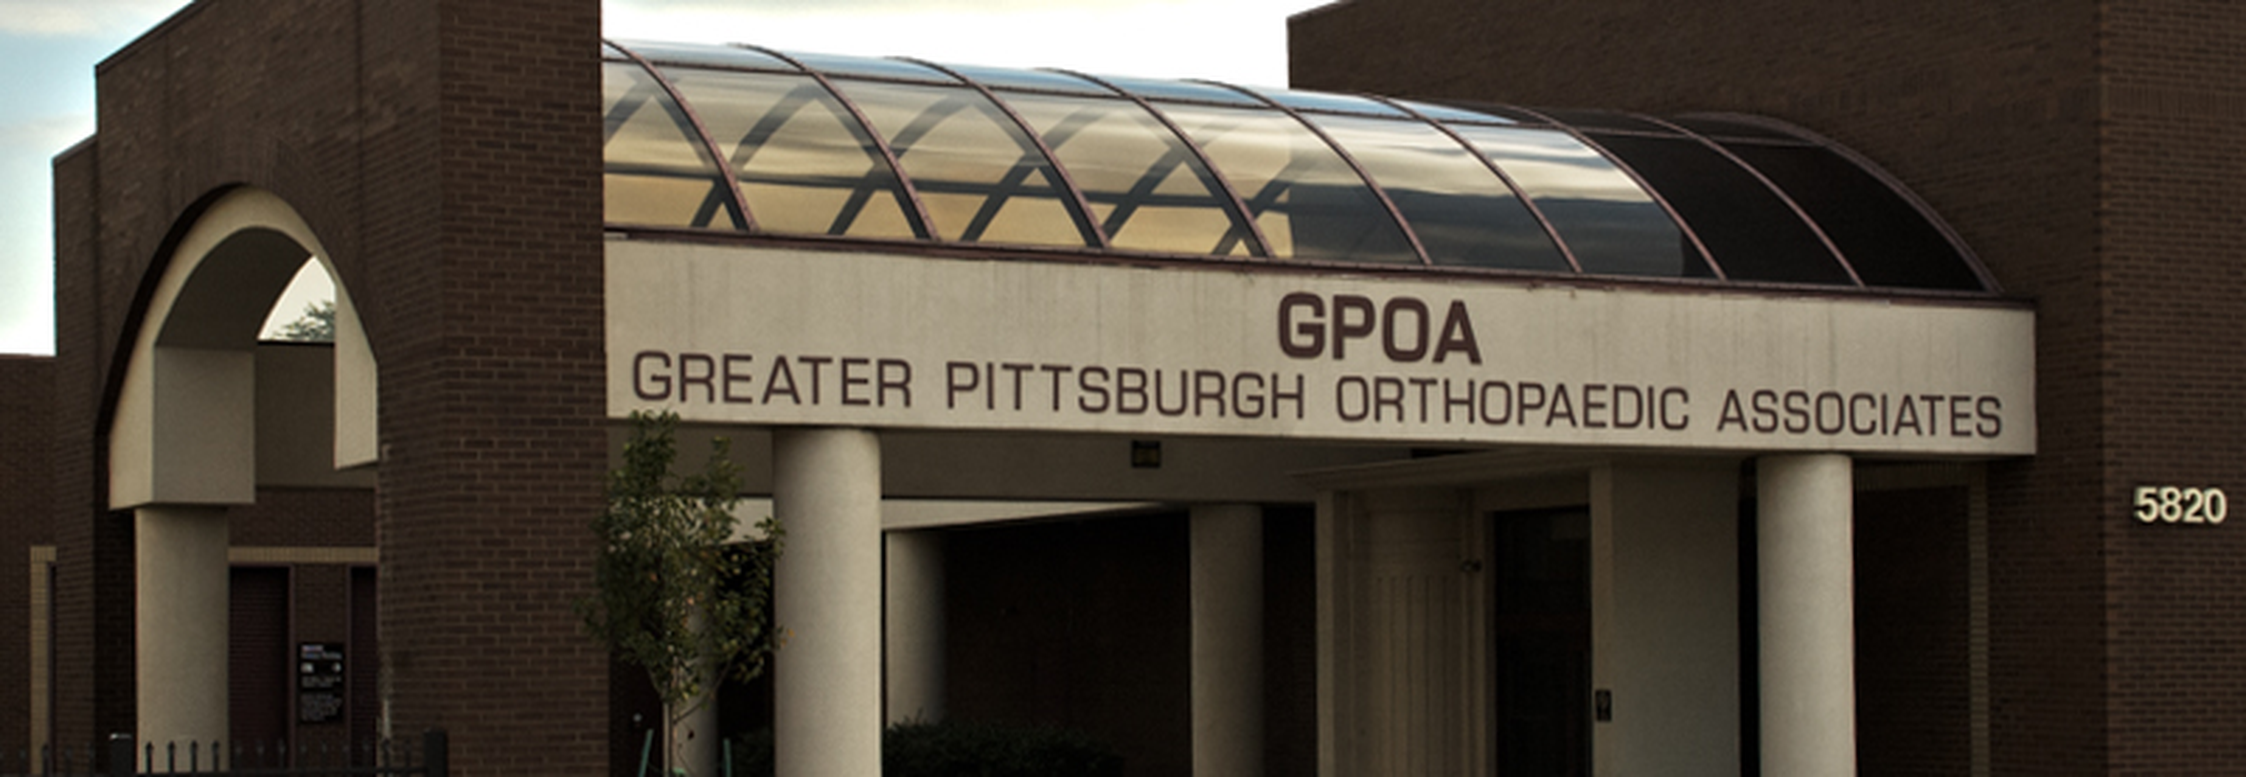 Shadyside Office - Pittsburgh, PA - Greater Pittsburgh Orthopaedic